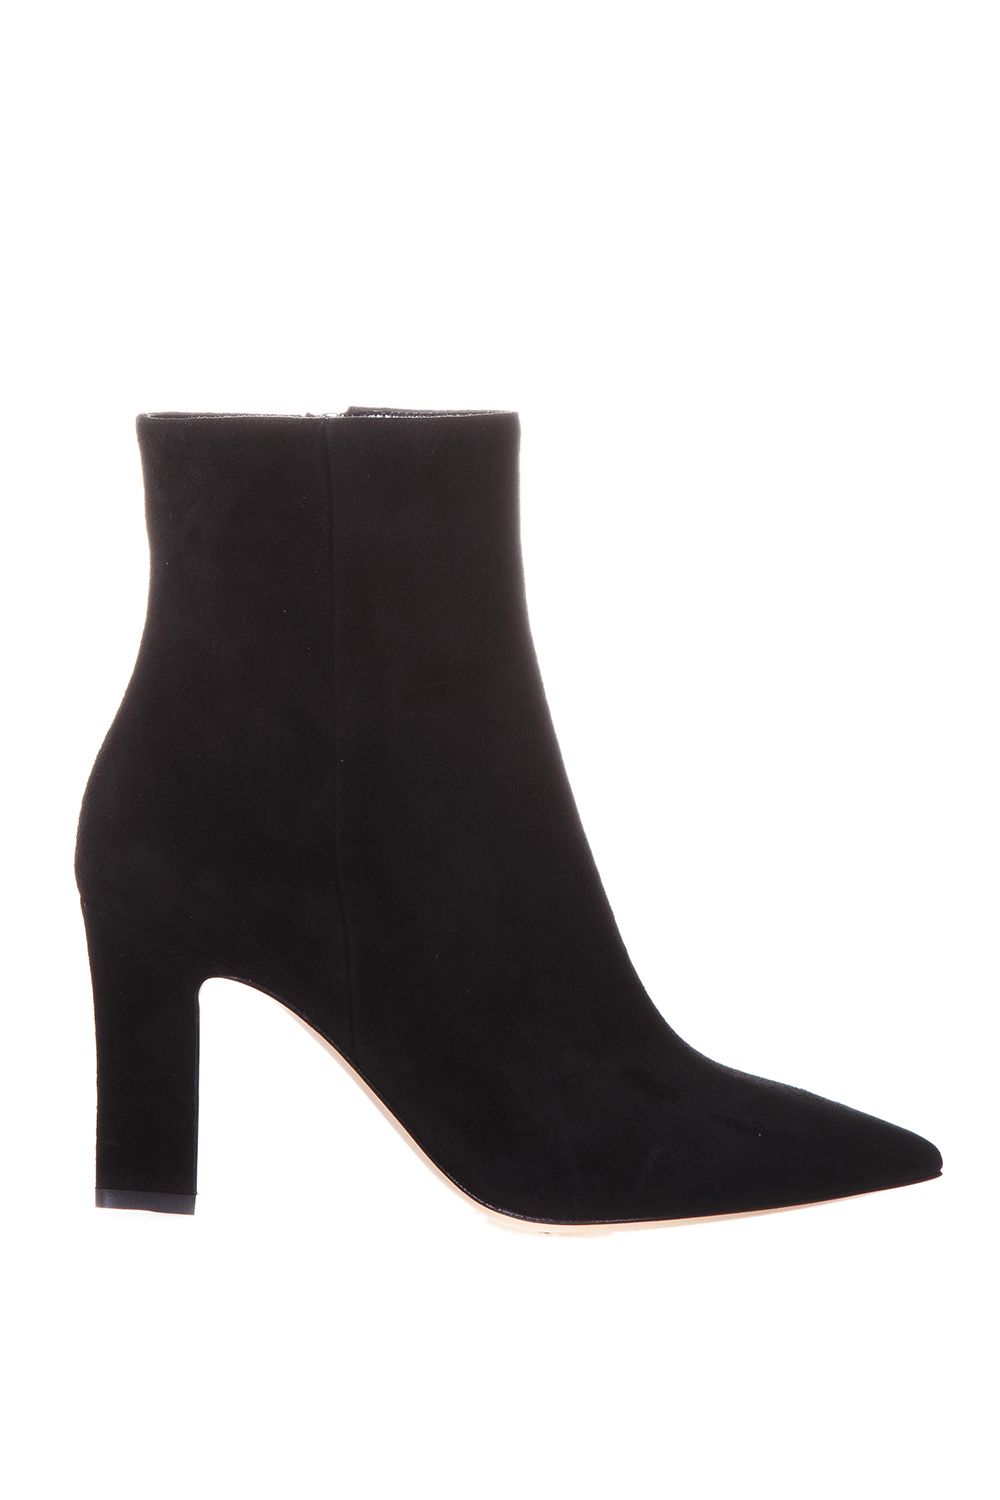 GIANVITO ROSSI 105 SUEDE ANKLE BOOTS, BLACK | ModeSens